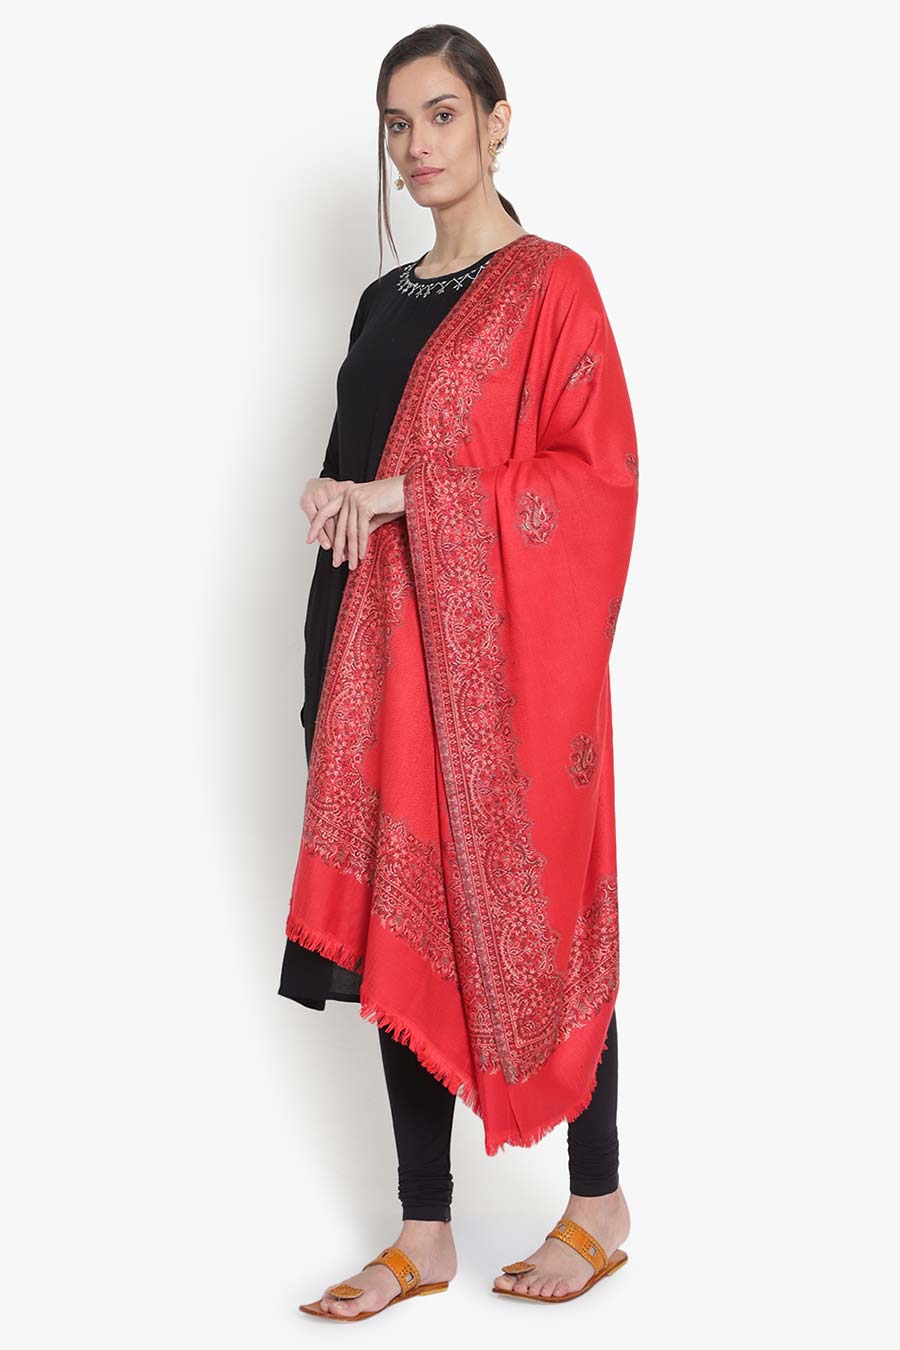 Red Paisley Woven Stole